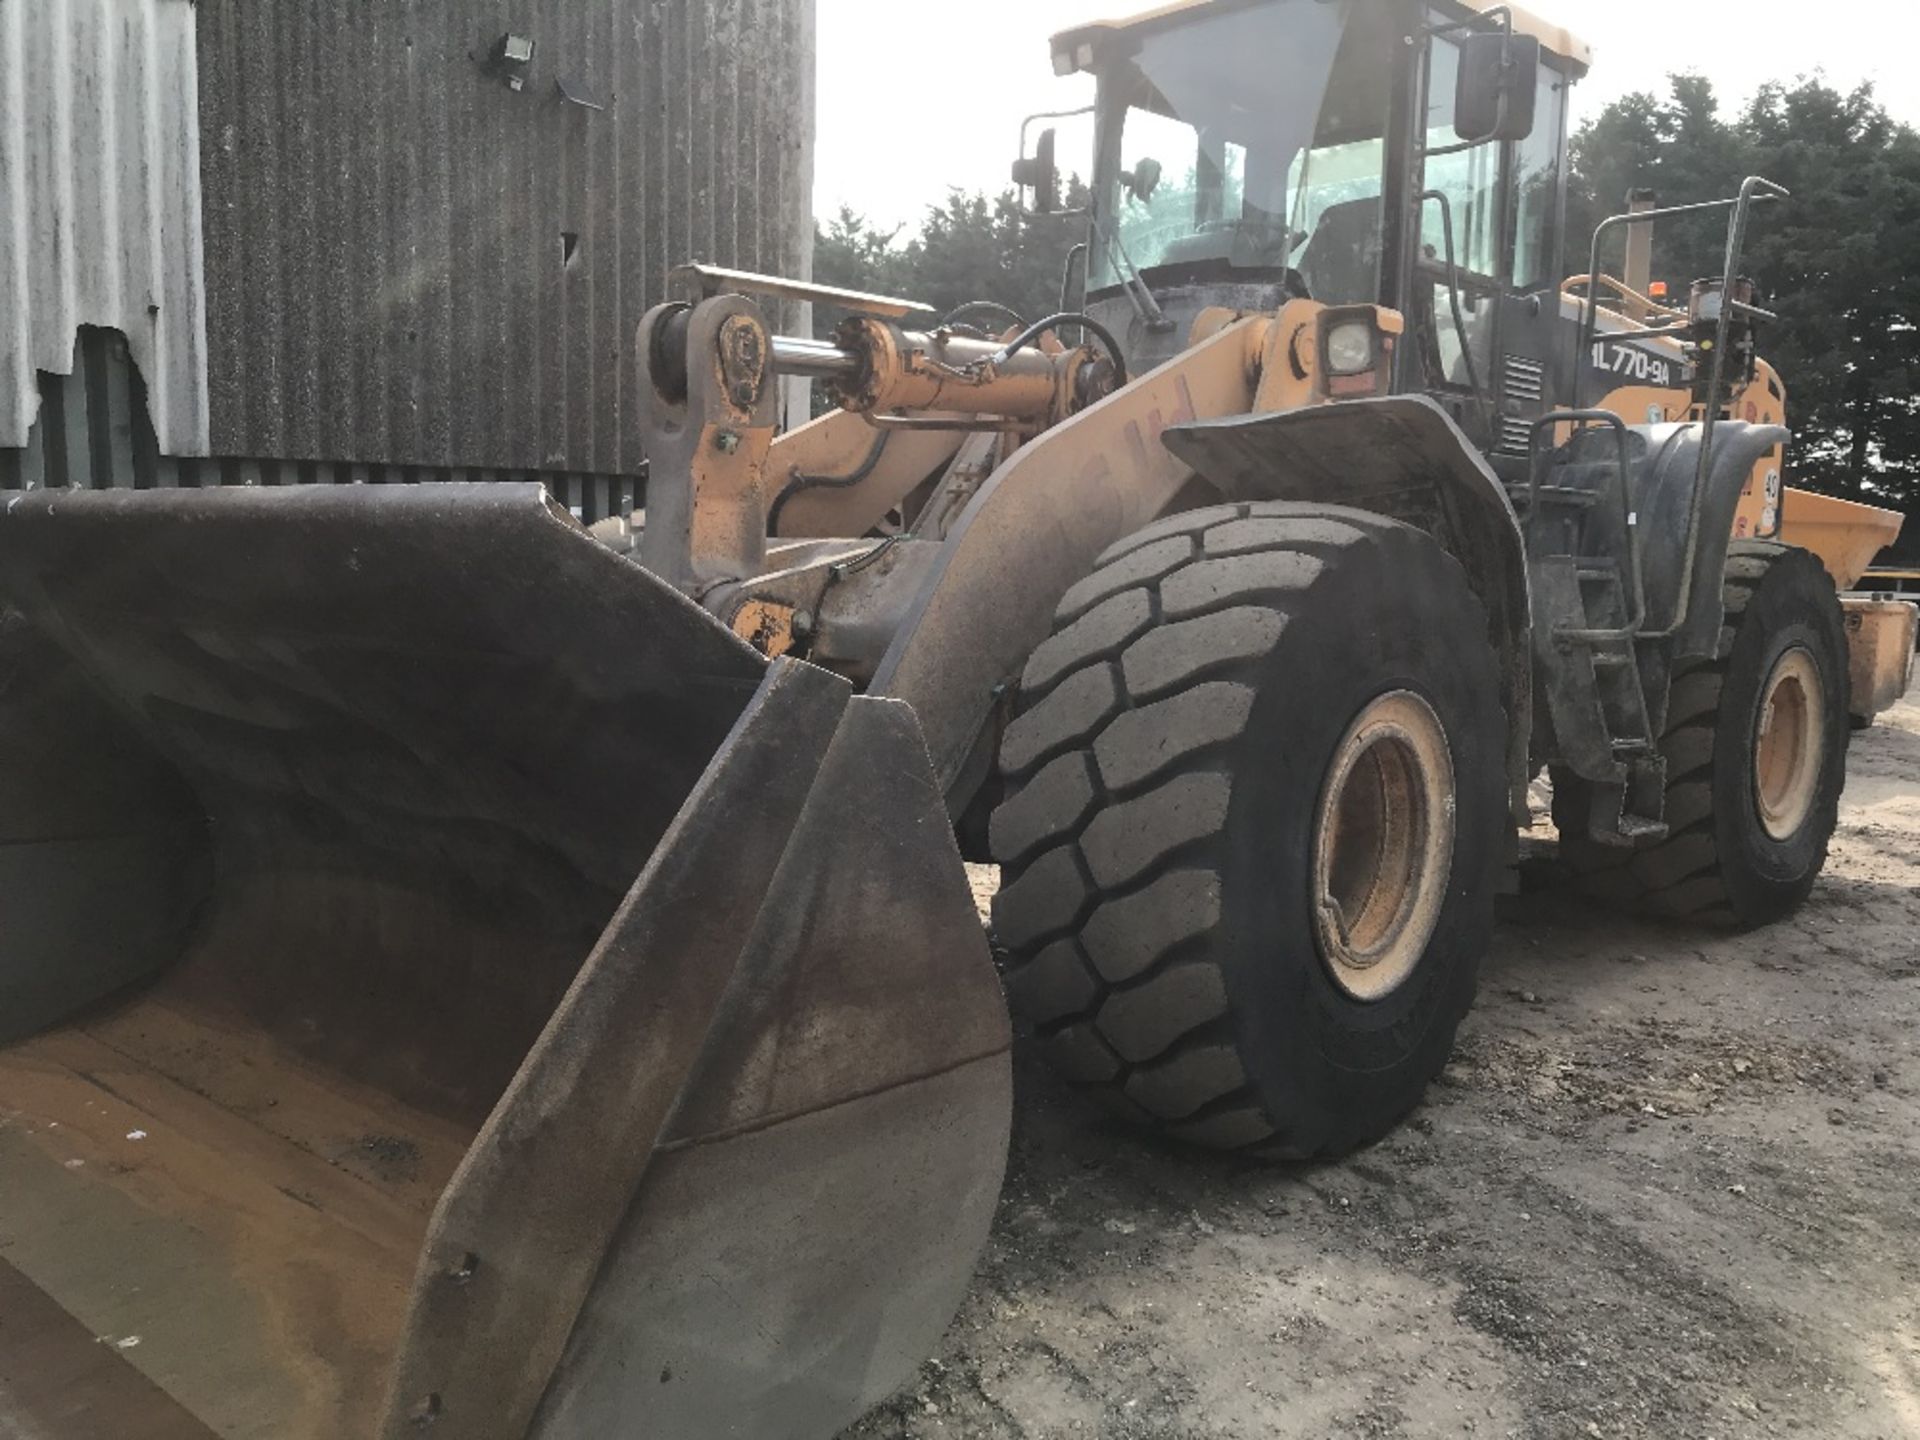 HYUNDAI HL770-9A LOADING SHOVEL, YEAR 2013 BUILD, SN:HHKHLK04AD0000080 WHEN TESTED WAS SEEN TO